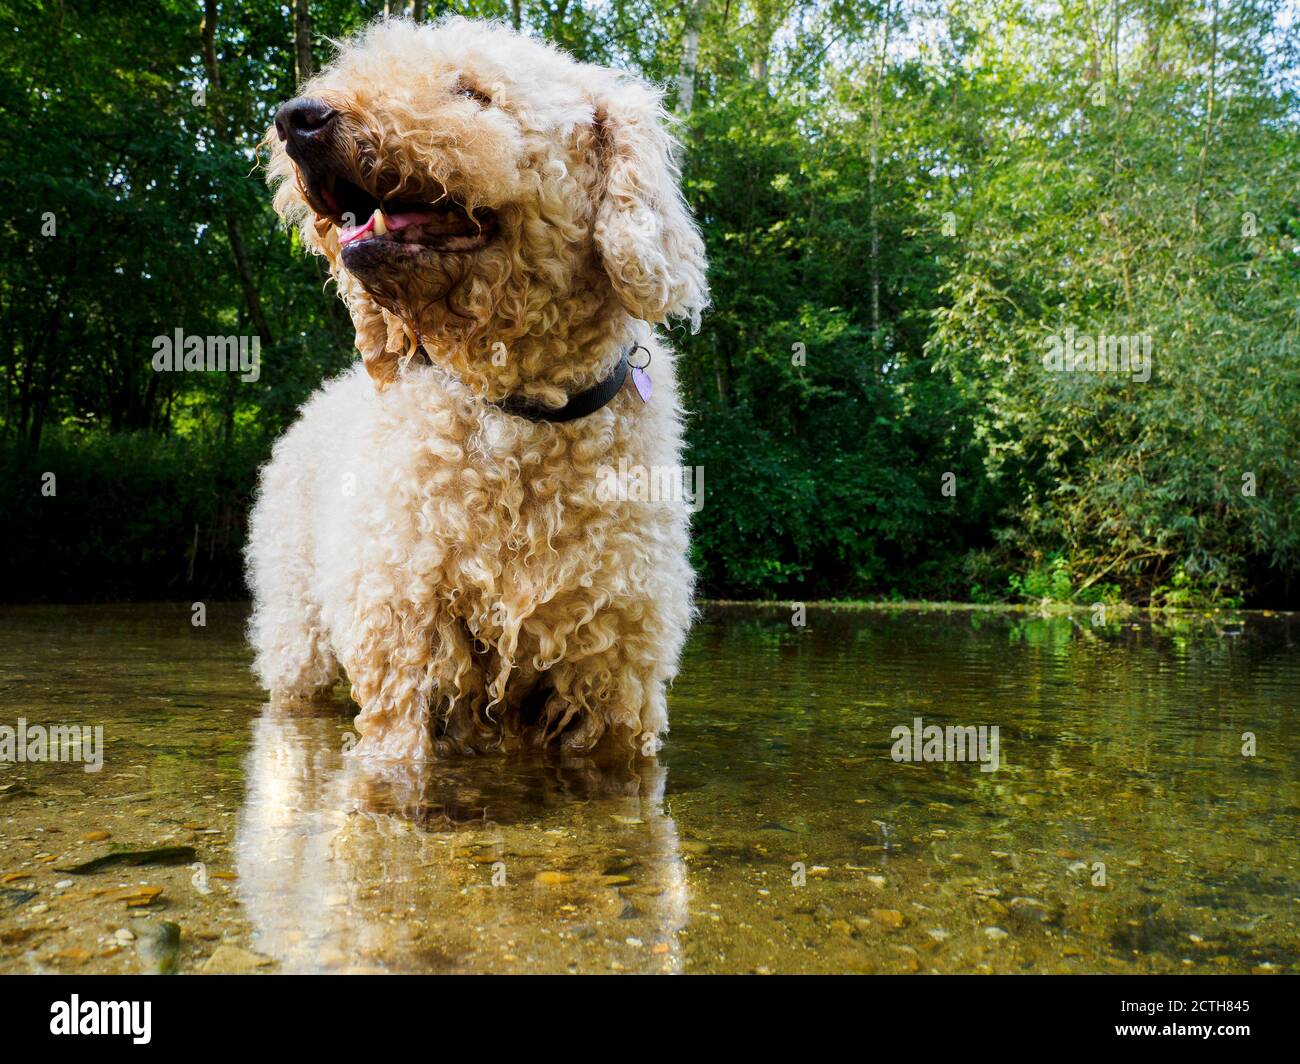 Labradoodle dog standing in a river, UK Stock Photo